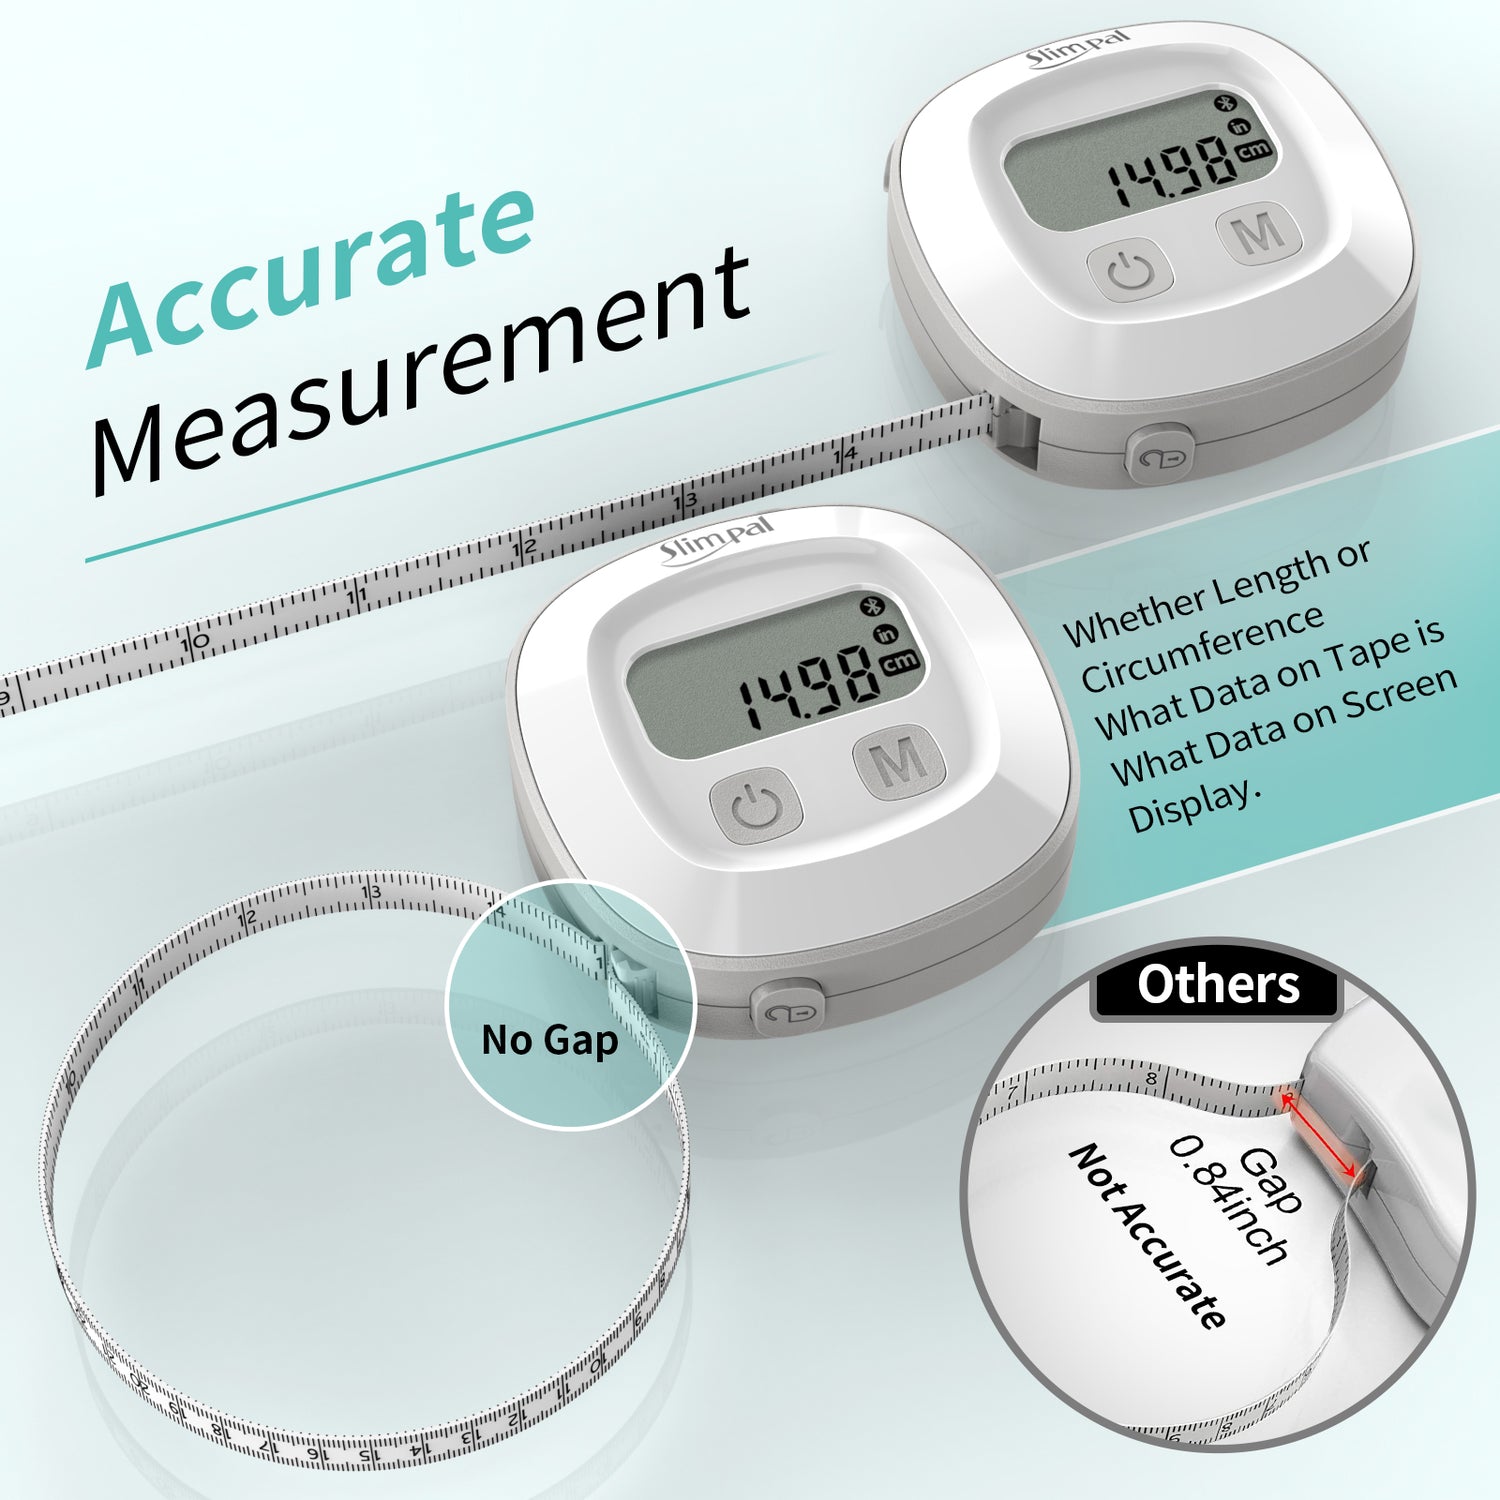 Slimpal Body Fat Measuring Tape and Smart Scale for Body Weight and Fa